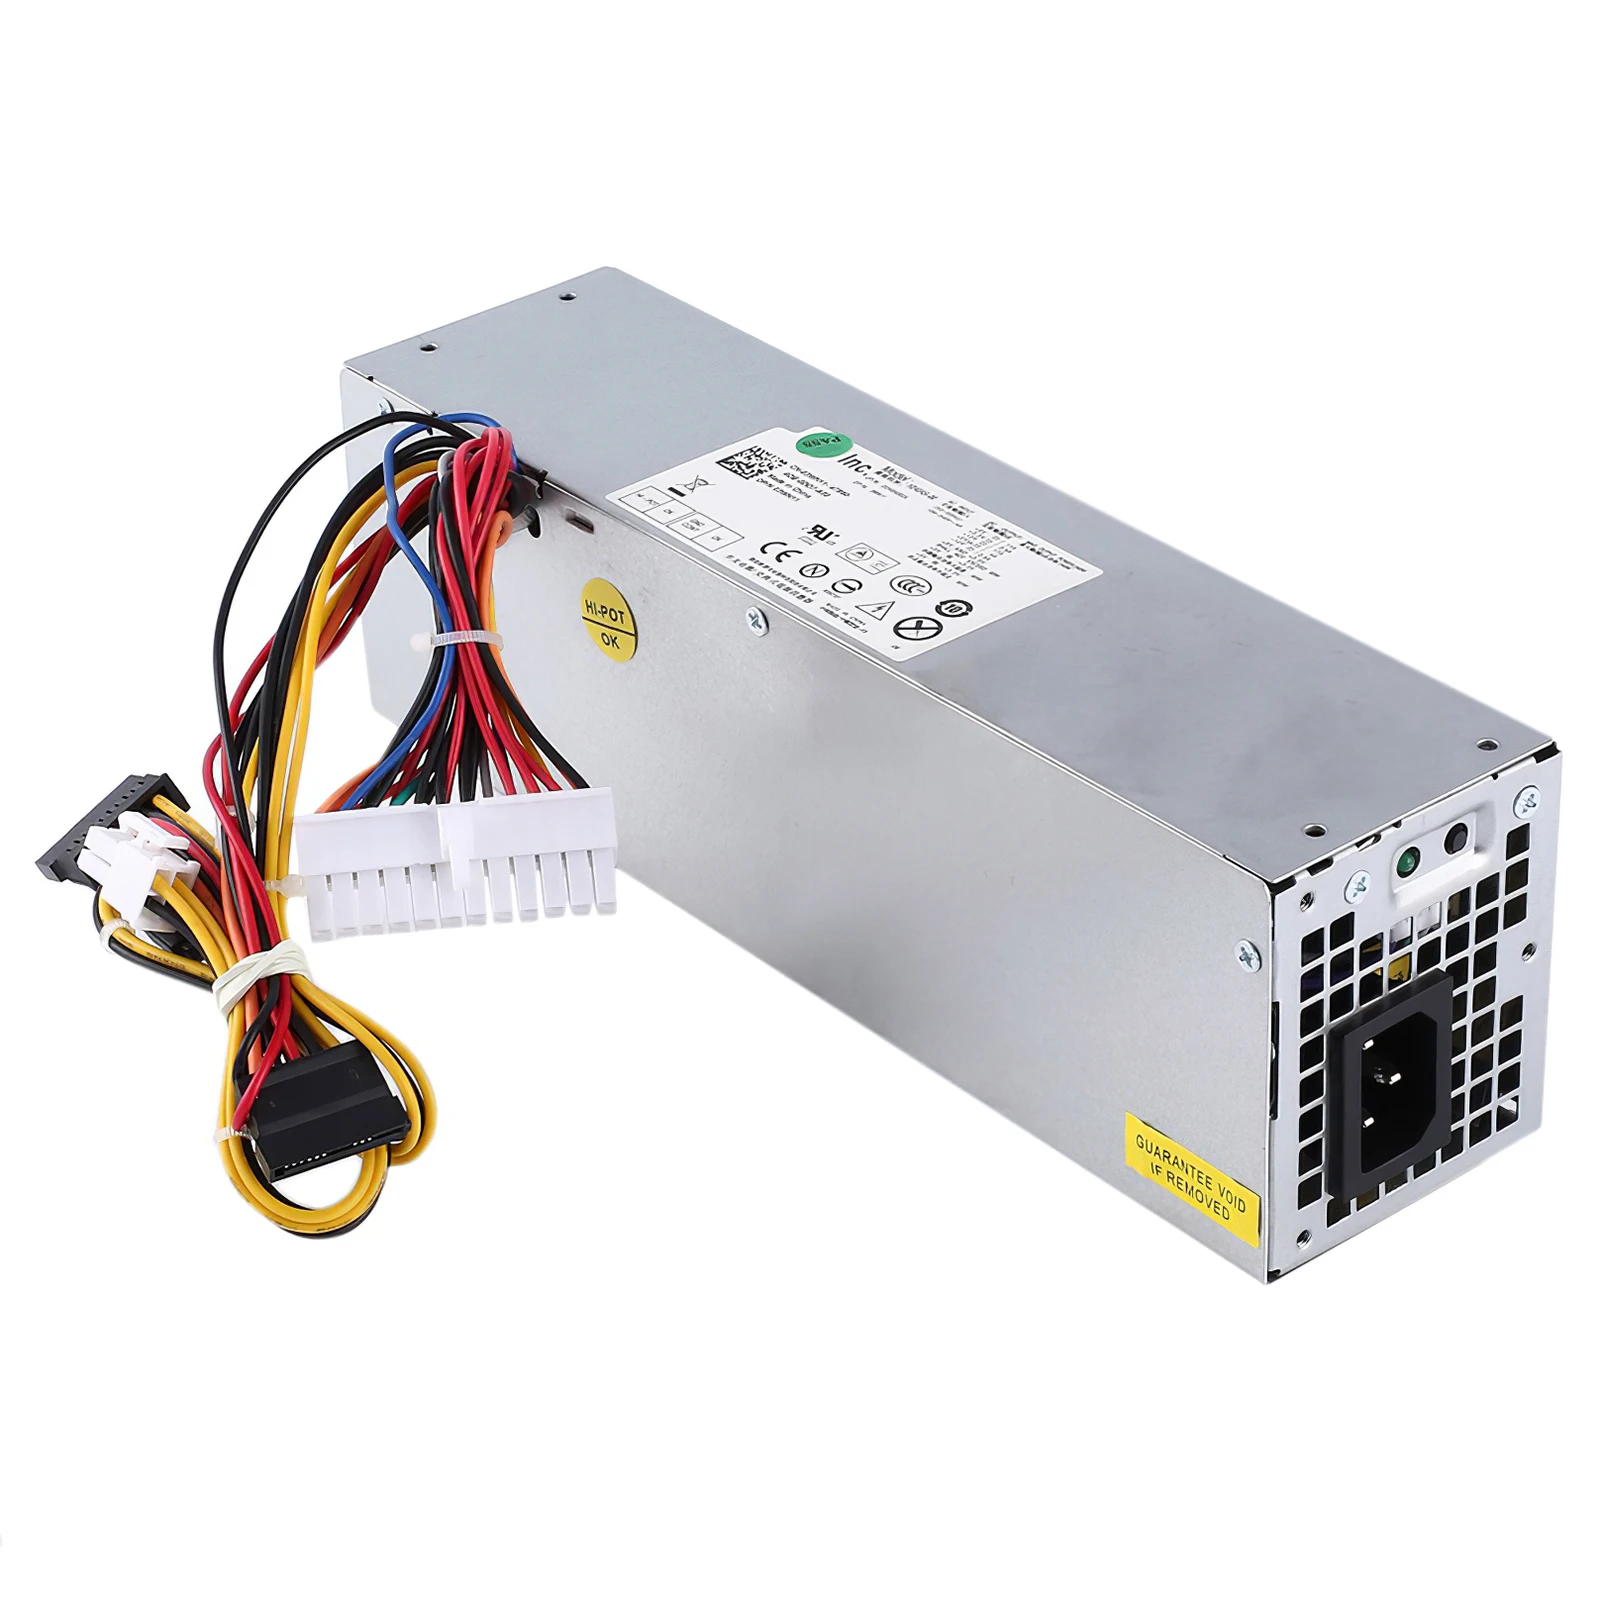 Stable Car Host Power Supply with Colling Fan Aluminum Alloy Host Power Supply for Dell Optiplex 390 SFF/790 SFF/960 SFF/990 SFF